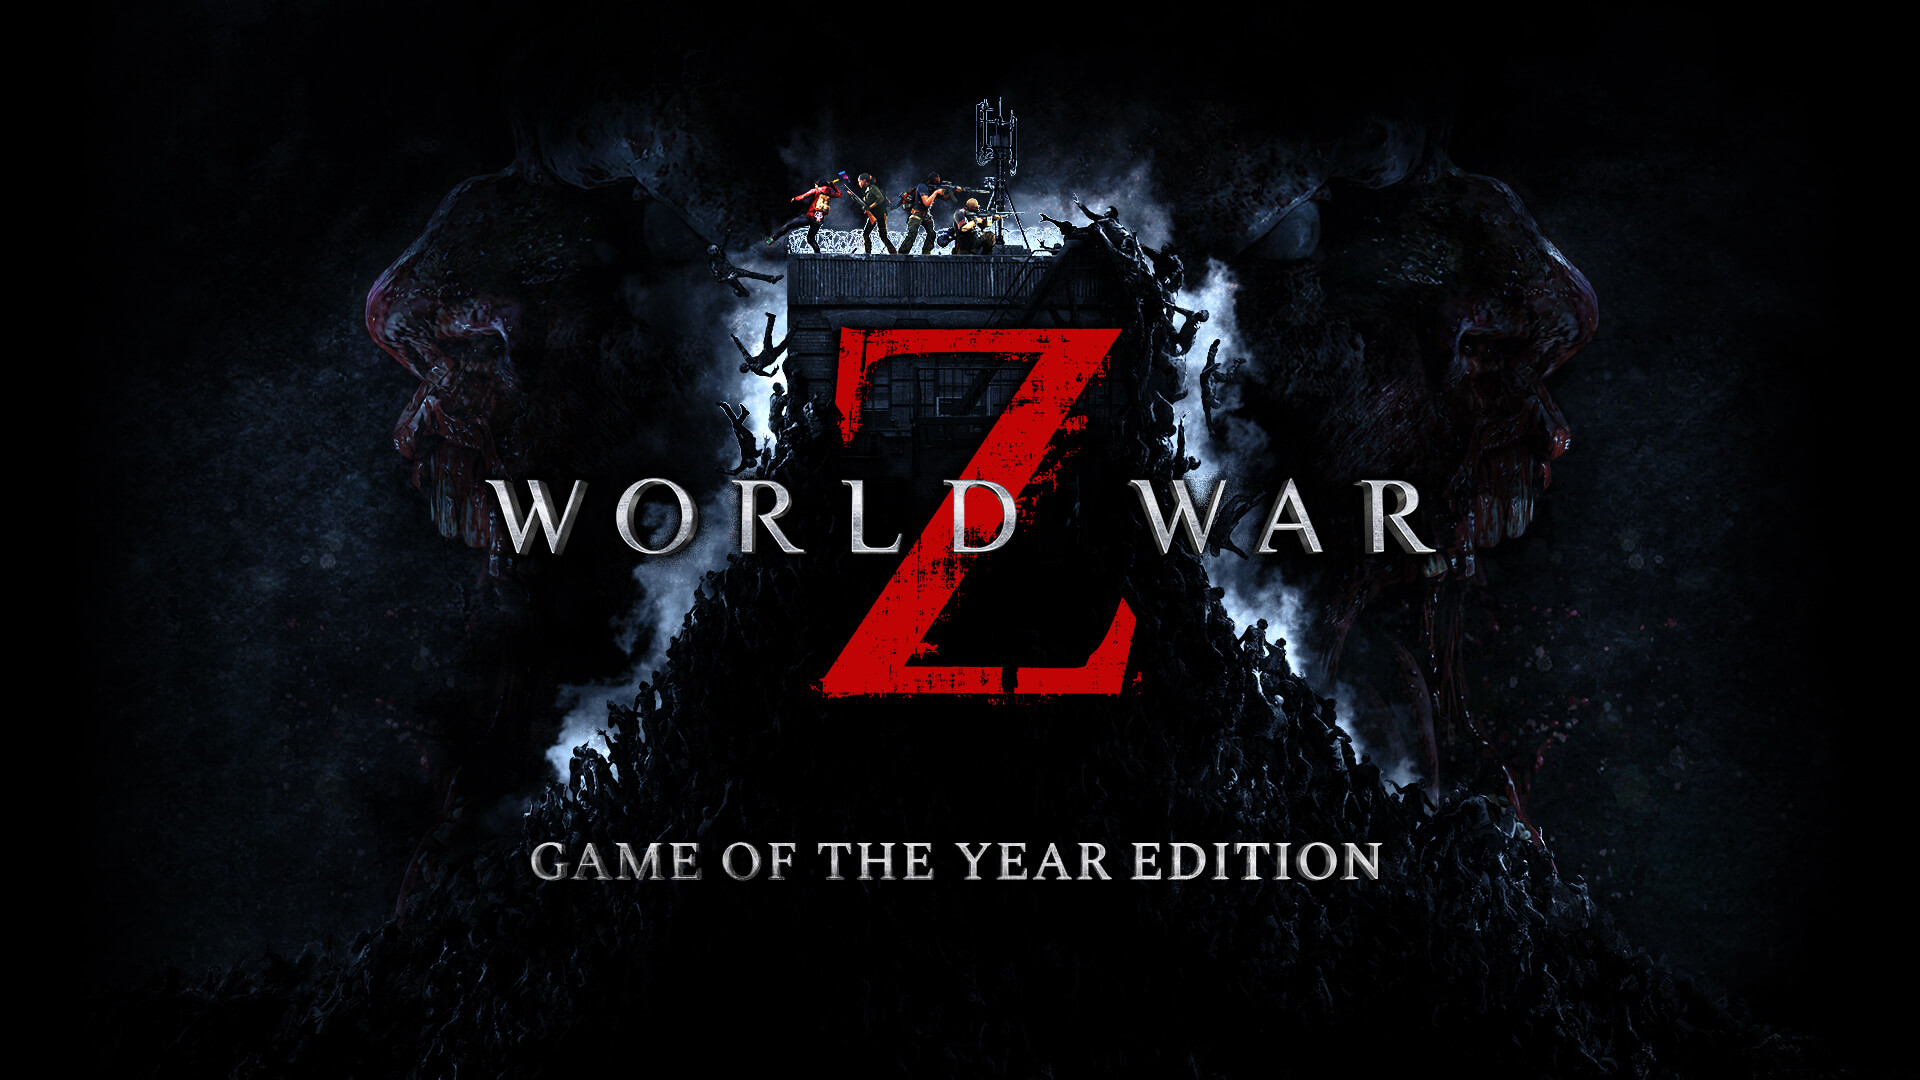 World War Z - Game of the Year Edition